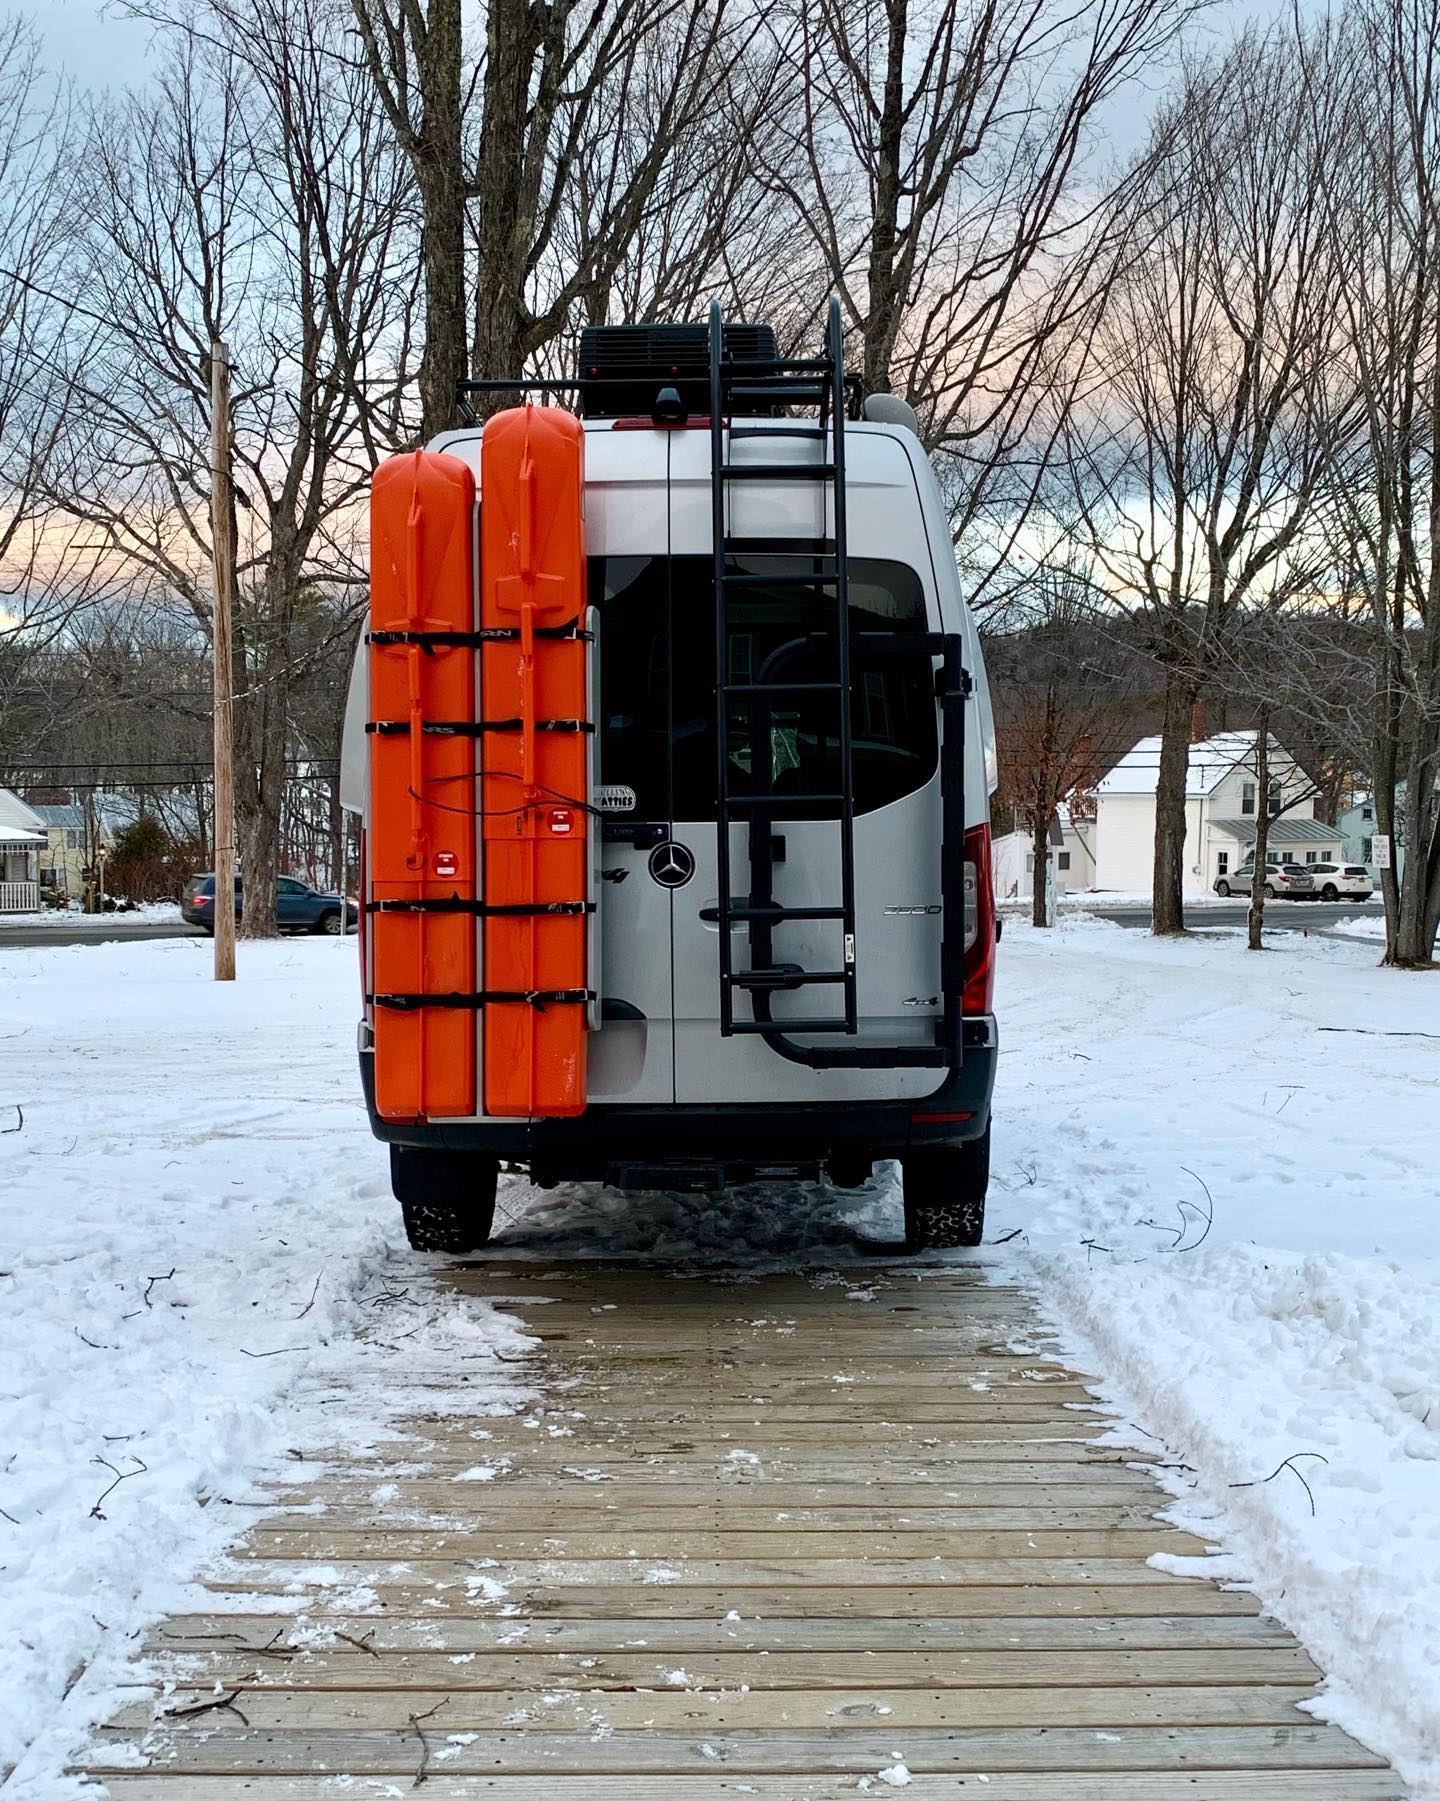 Sprinter all packed and ready to head west from Kingfield, Maine. Destination Idaho with 7 pairs of skis in the orange Sport Tubes attached to the Owl Engineering Sherpa on the back door. #vanlife #gnarvan #owlengineering #sporttube #sprintervan #awoladventurerigs #orcuttphotography #rollingfatties